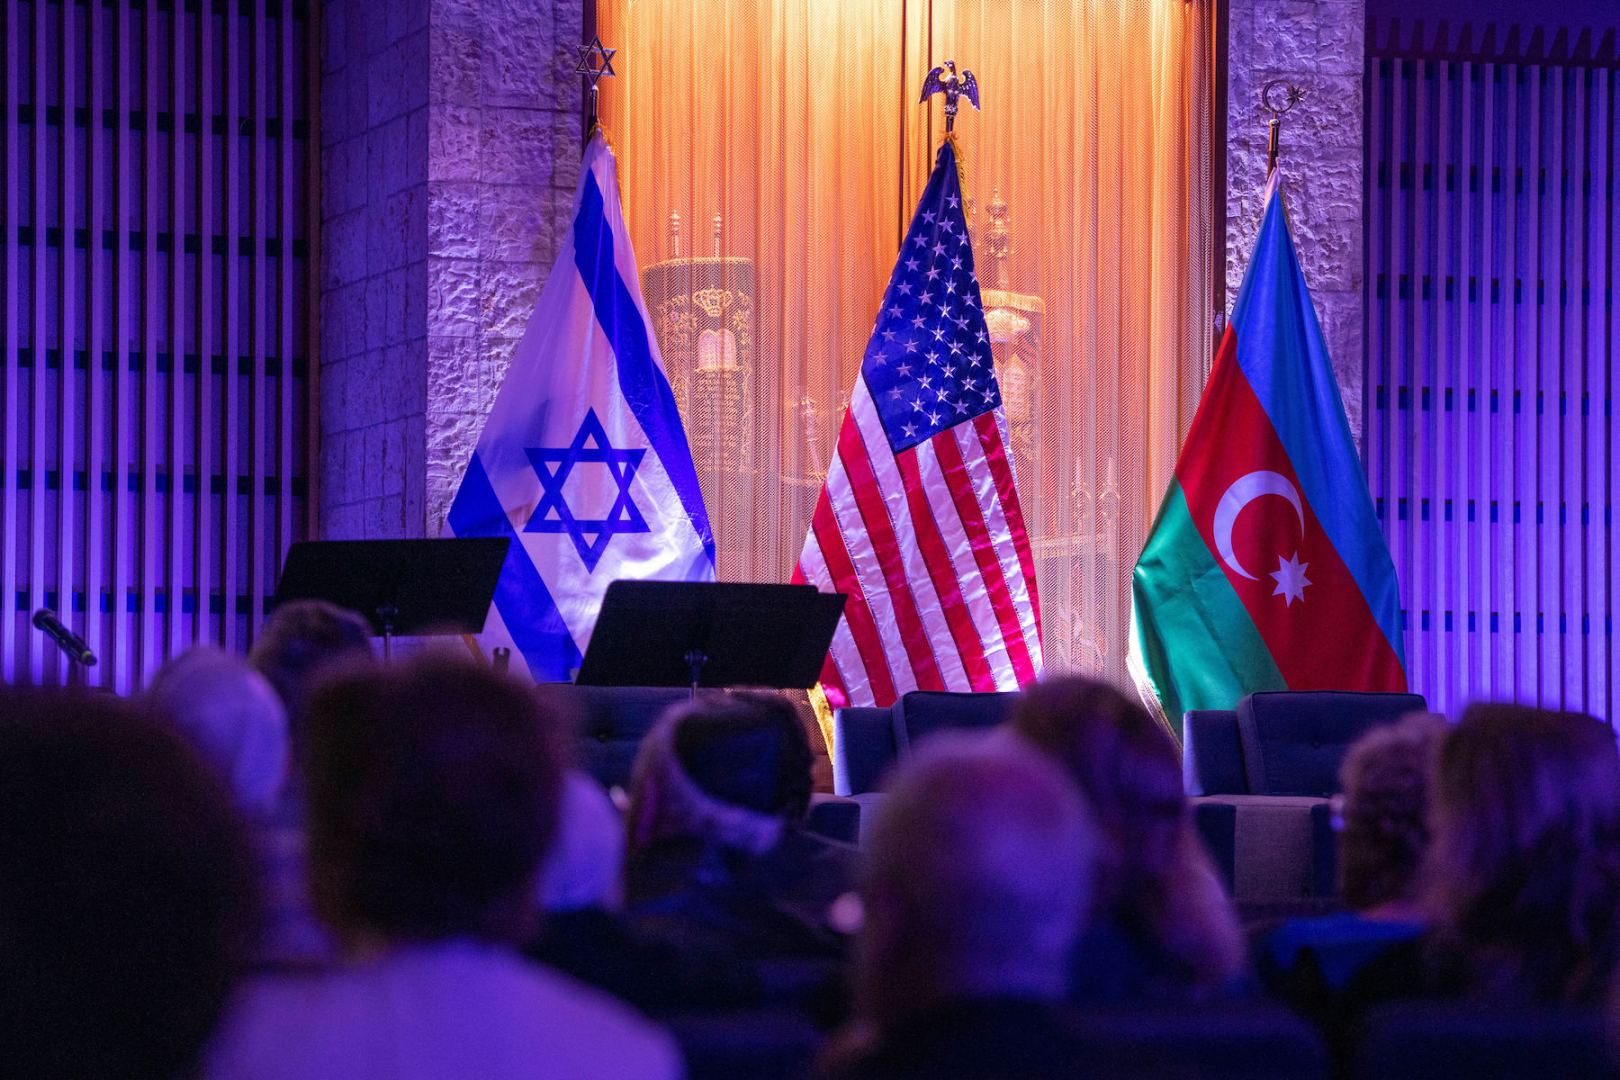 30th anniversary of Azerbaijan-Israel diplomatic relations celebrated in Los Angeles (PHOTO)